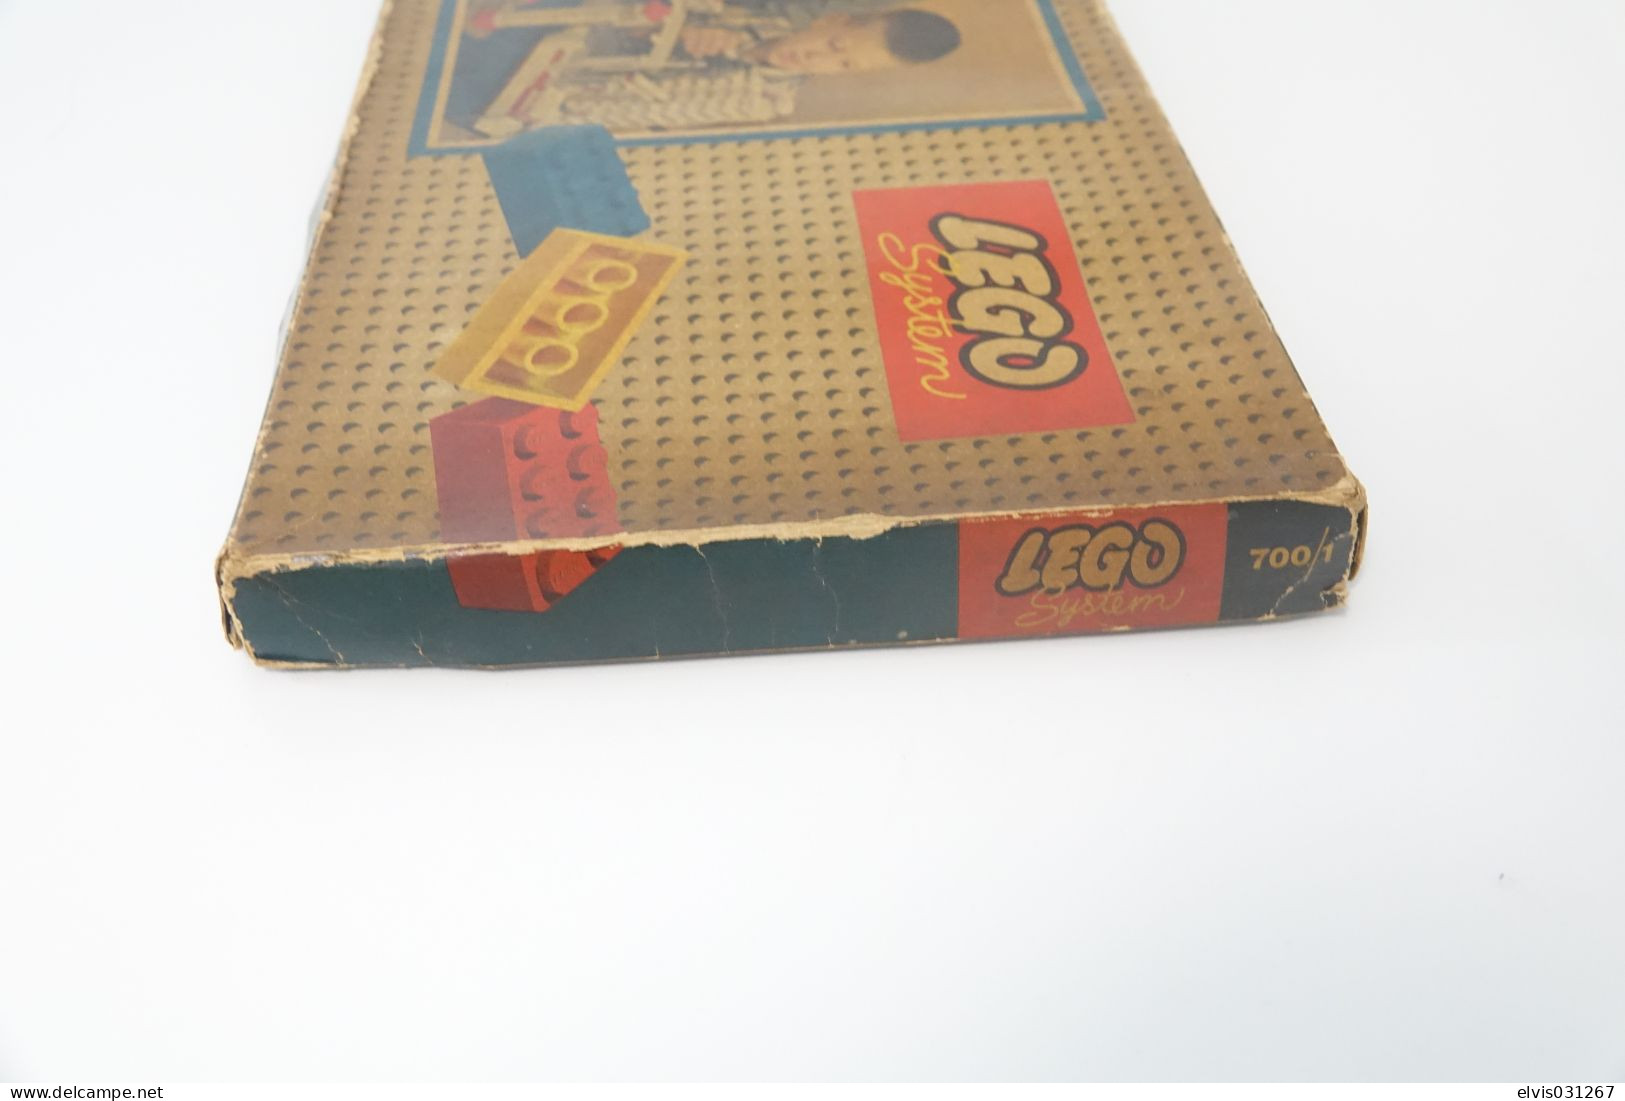 LEGO - 700/1 Gift Package (Lego Mursten) Extremely Rare 1st Edition - Collector Item - Original Lego 1956 - Vintage - Cataloghi